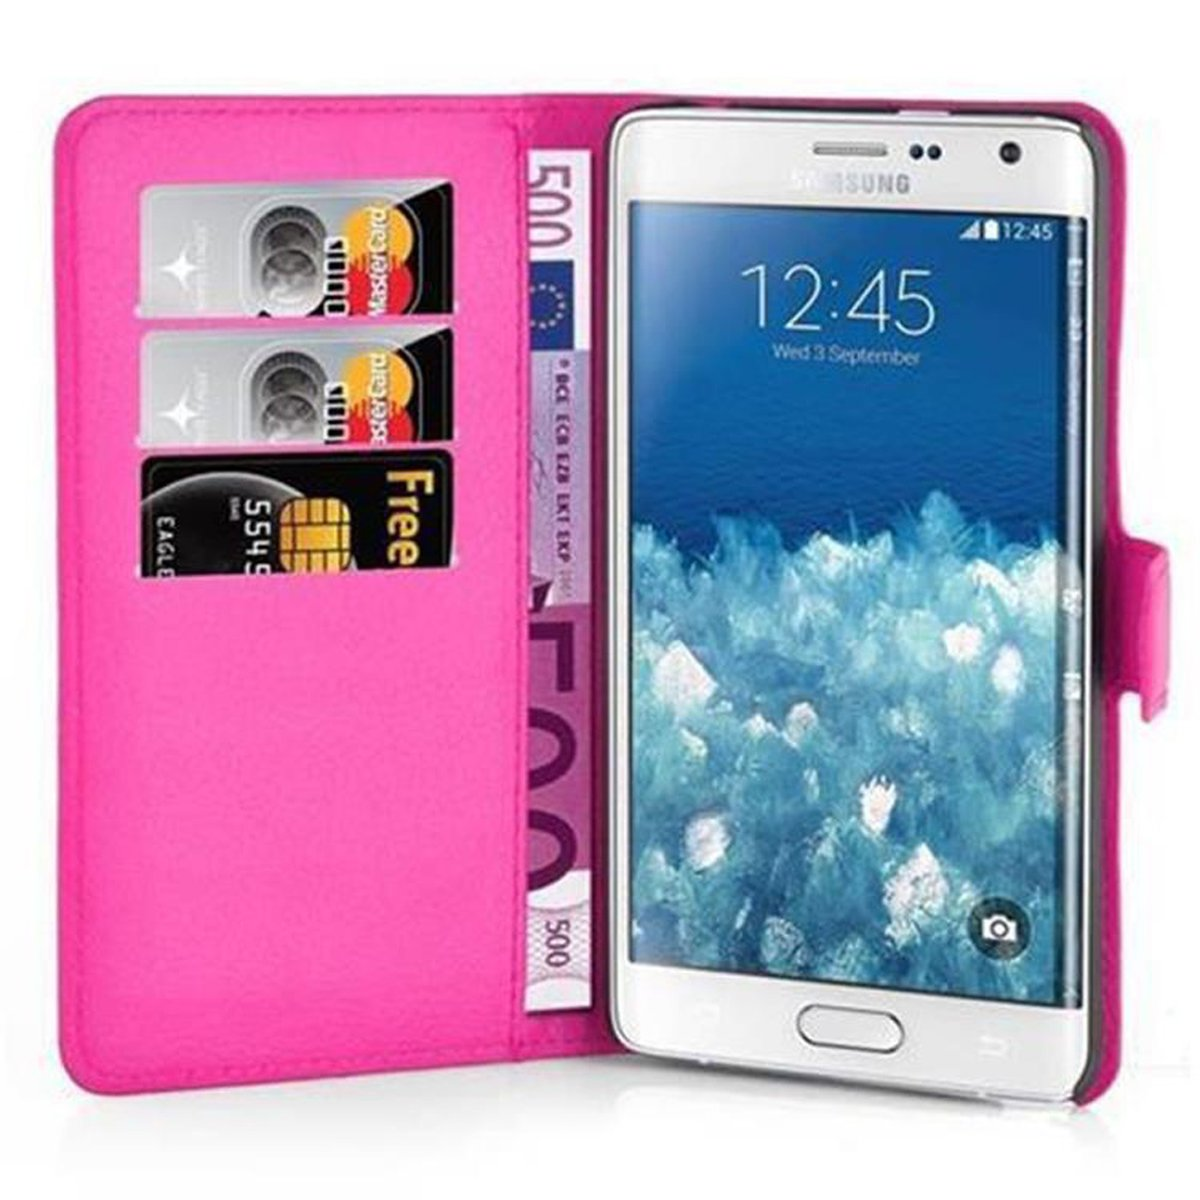 Bookcover, Standfunktion, CHERRY Book Galaxy Samsung, PINK EDGE, CADORABO NOTE Hülle